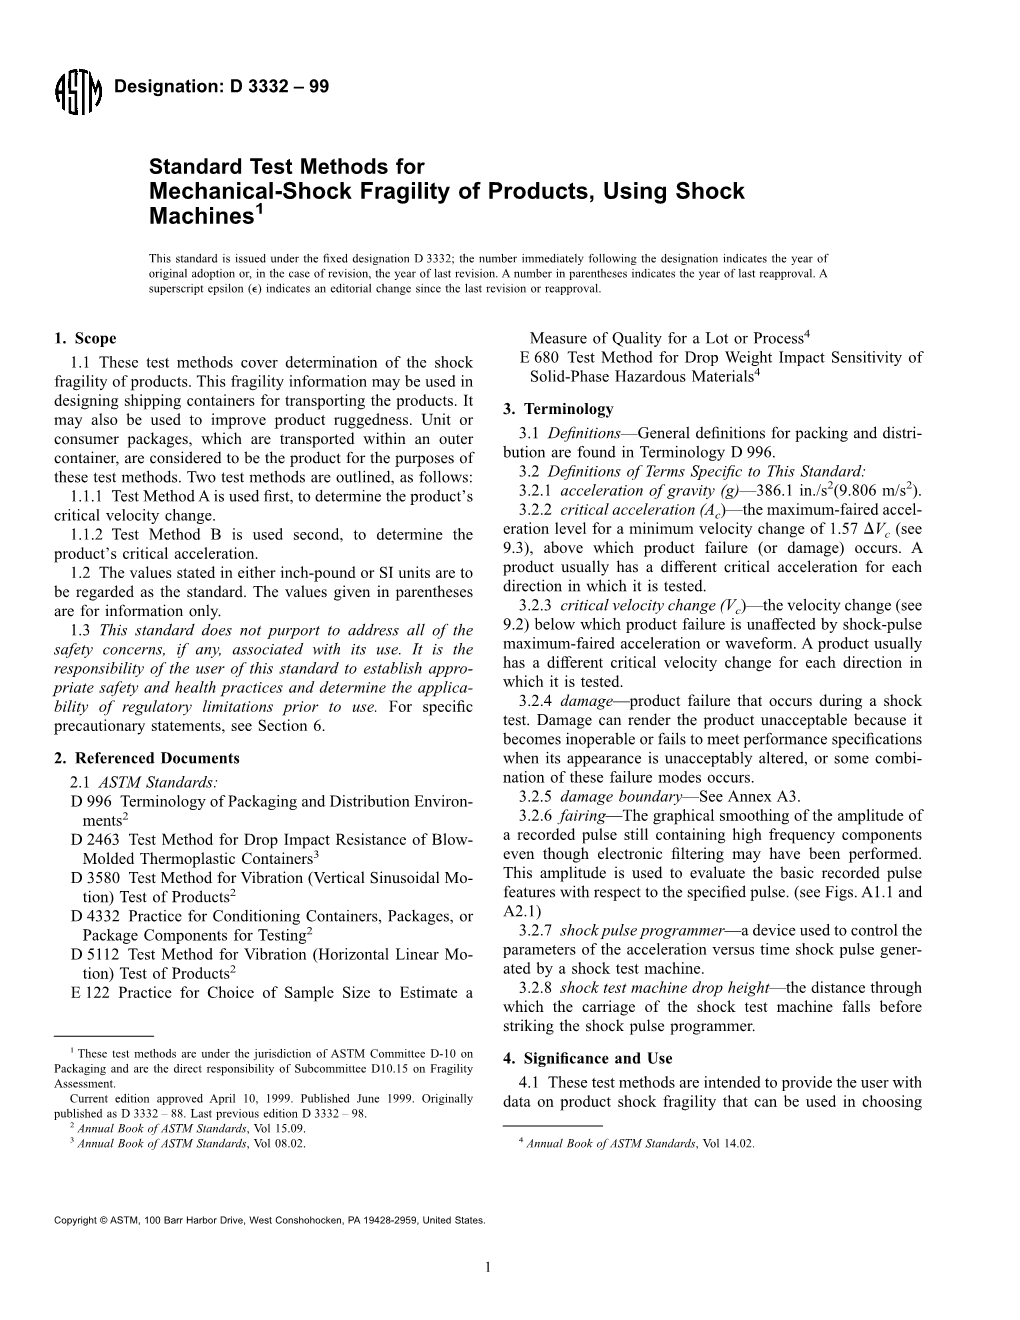 Standard Test Methods for Mechanical-Shock Fragility of Products, Using Shock Machines1